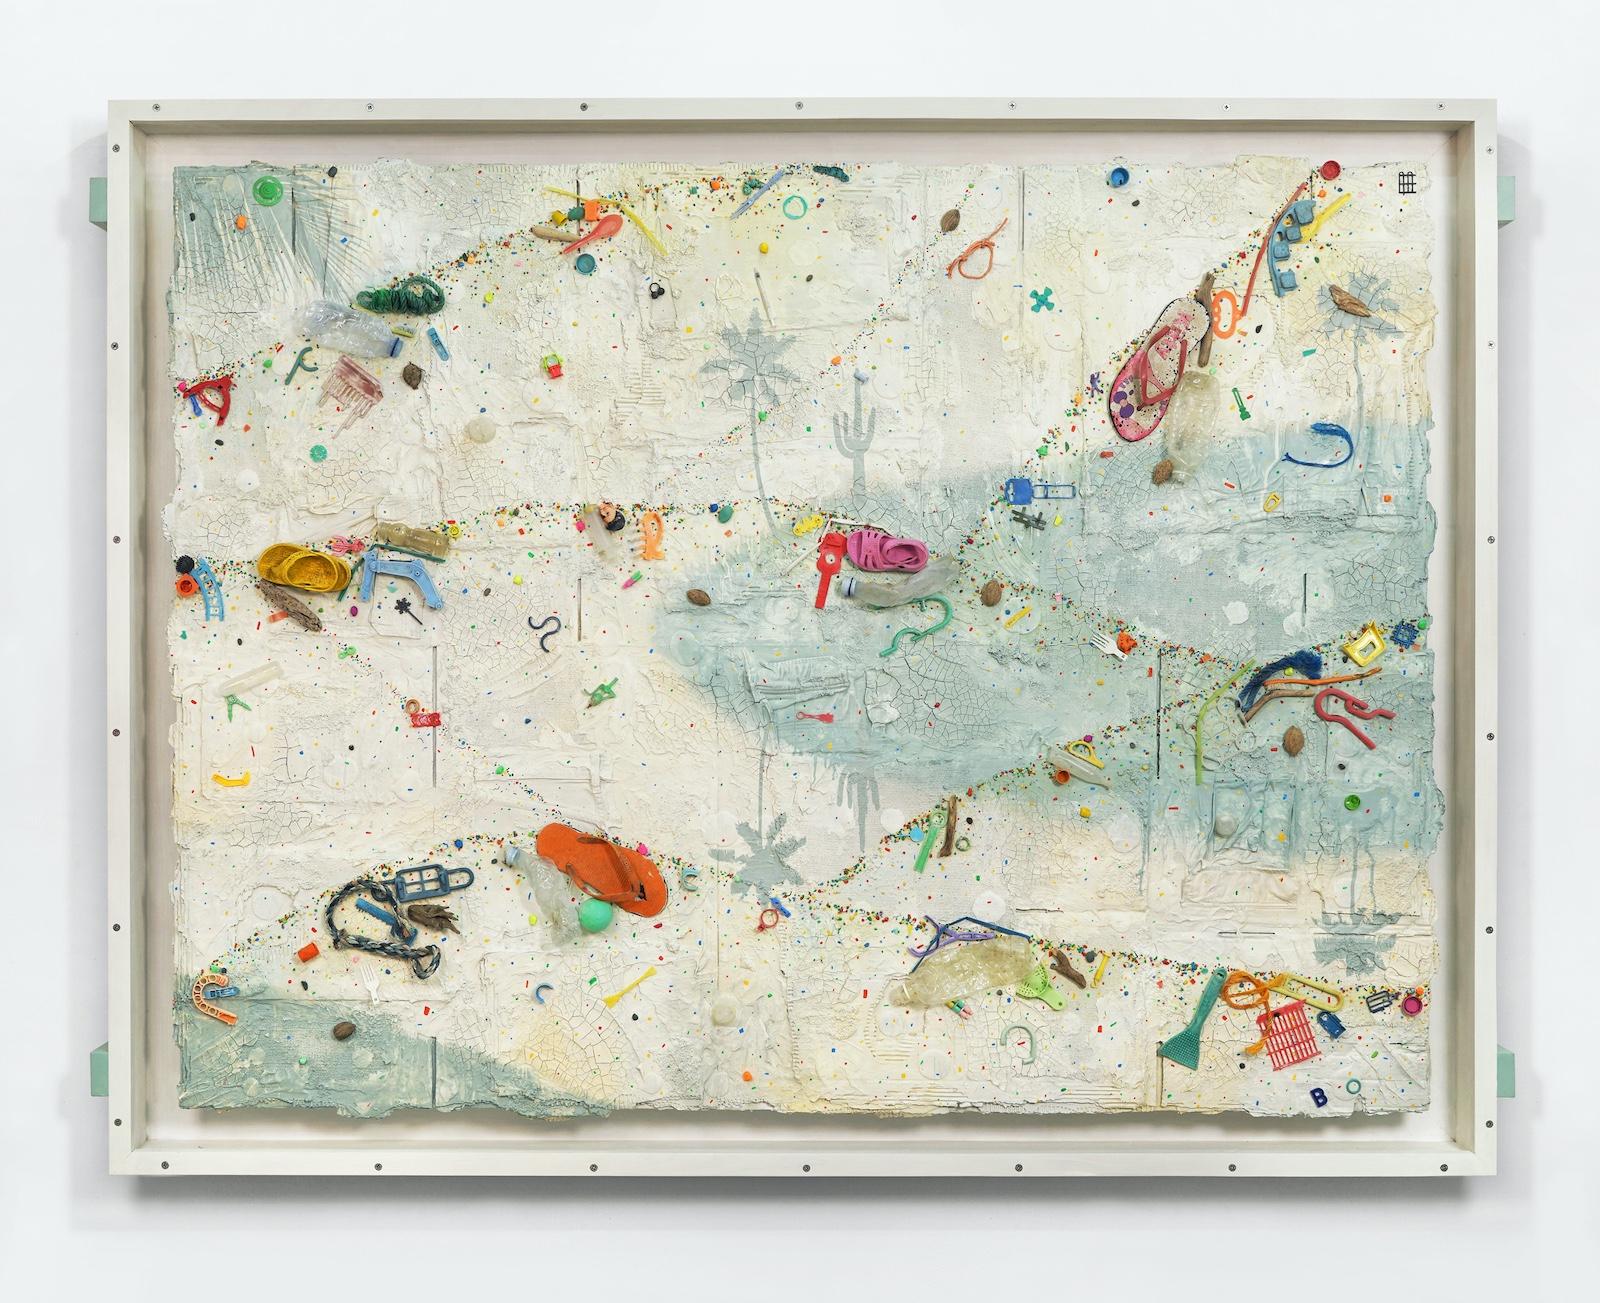 Ashley Bickerton, Dawn Estuary, 2020. Canvas looks like the surface of water or a hazy sky. Sprinkled with artist's trademark beach debris and textured paint. 